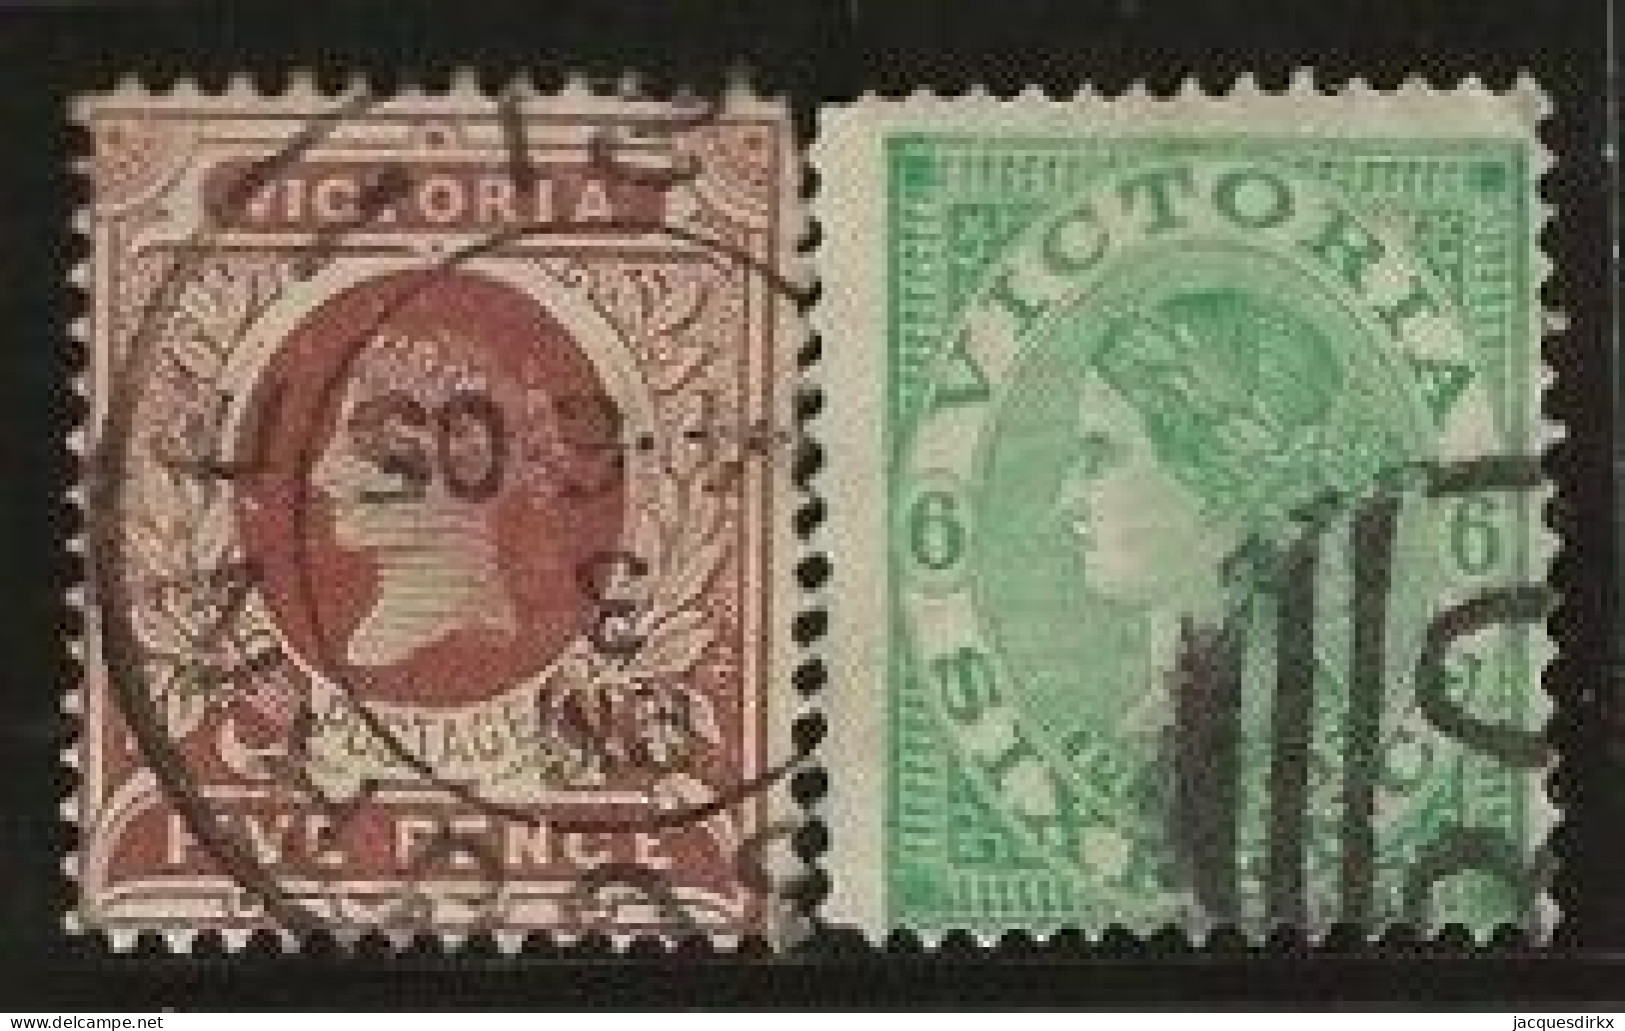 Victoria    .   SG    .   391/392     .   O      .     Cancelled - Used Stamps